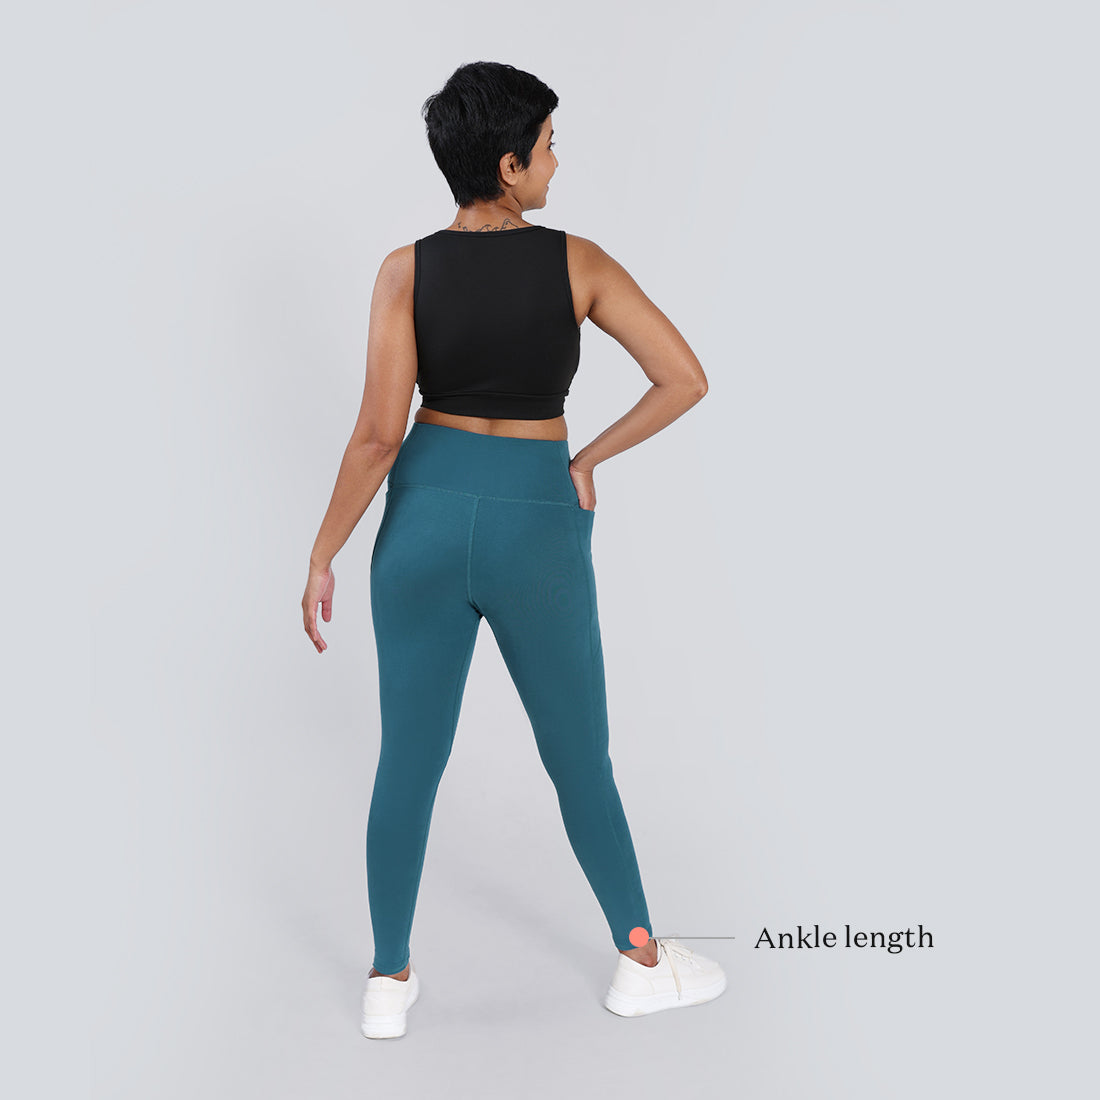 The Groove-In Cotton Leggings